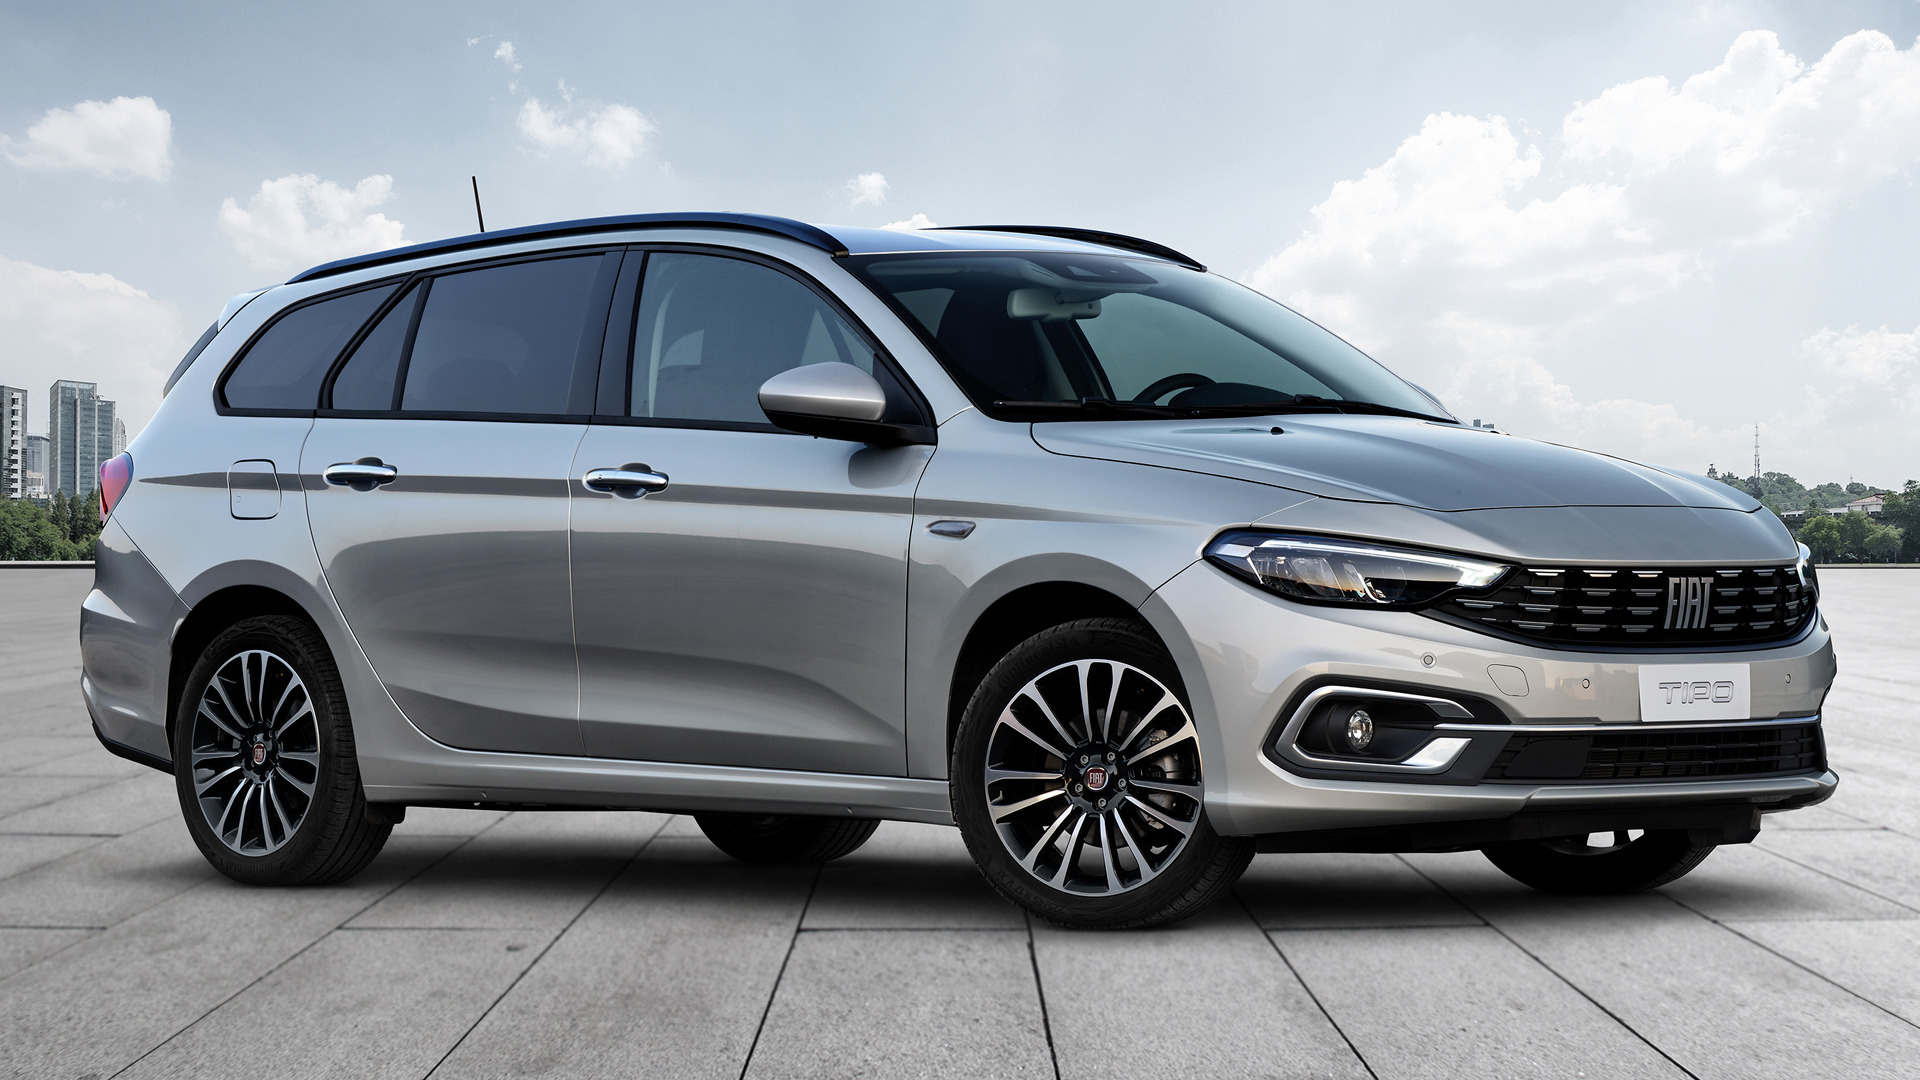 2020 Fiat Tipo Station Wagon Wallpapers and HD Images